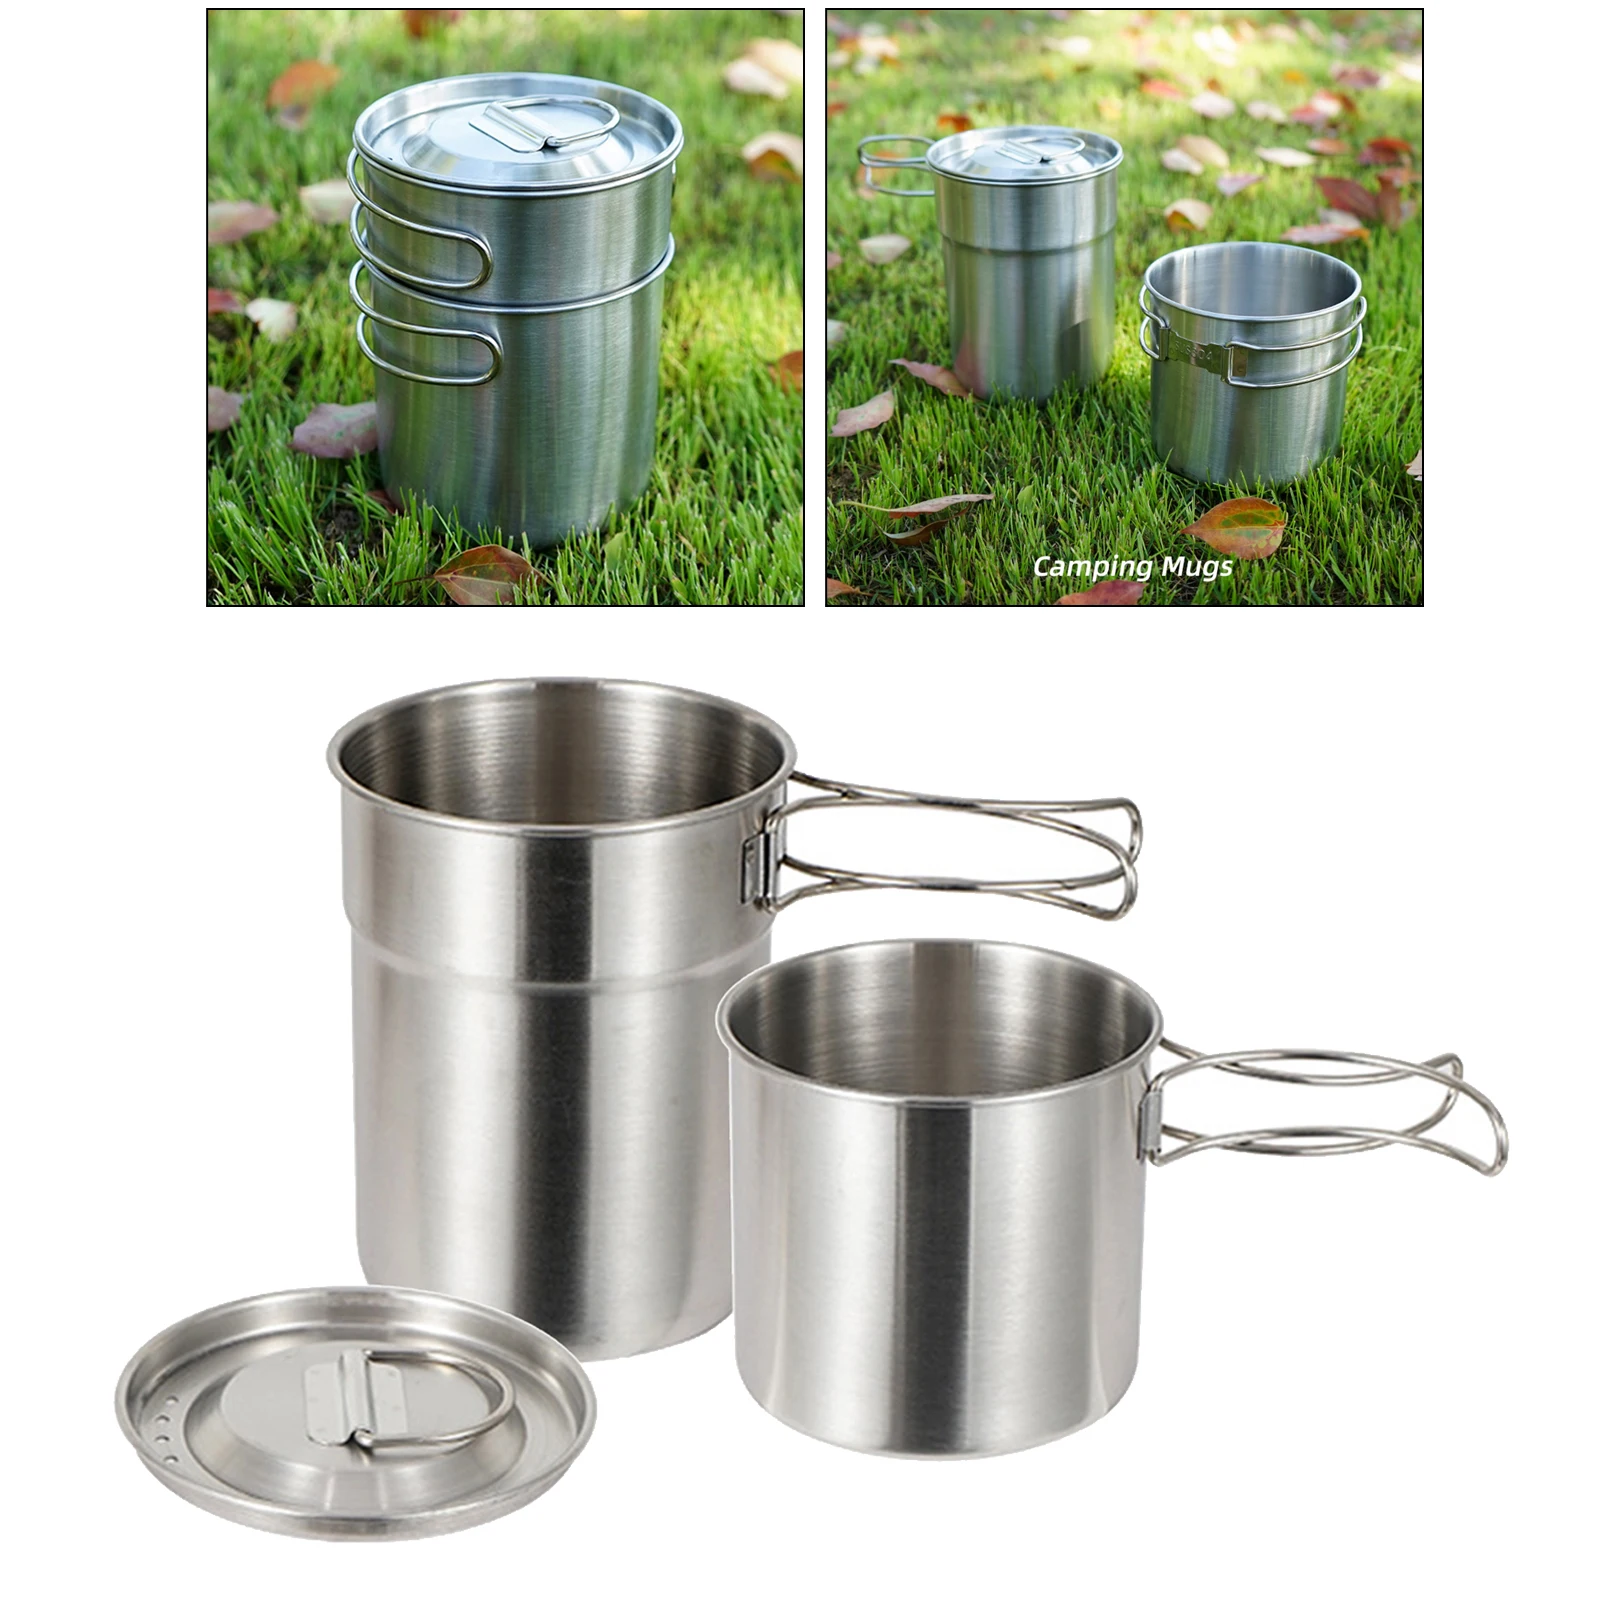 2x Stainless Steel Cookware Cooking Portable Bowl Folding for Camping Picnic 